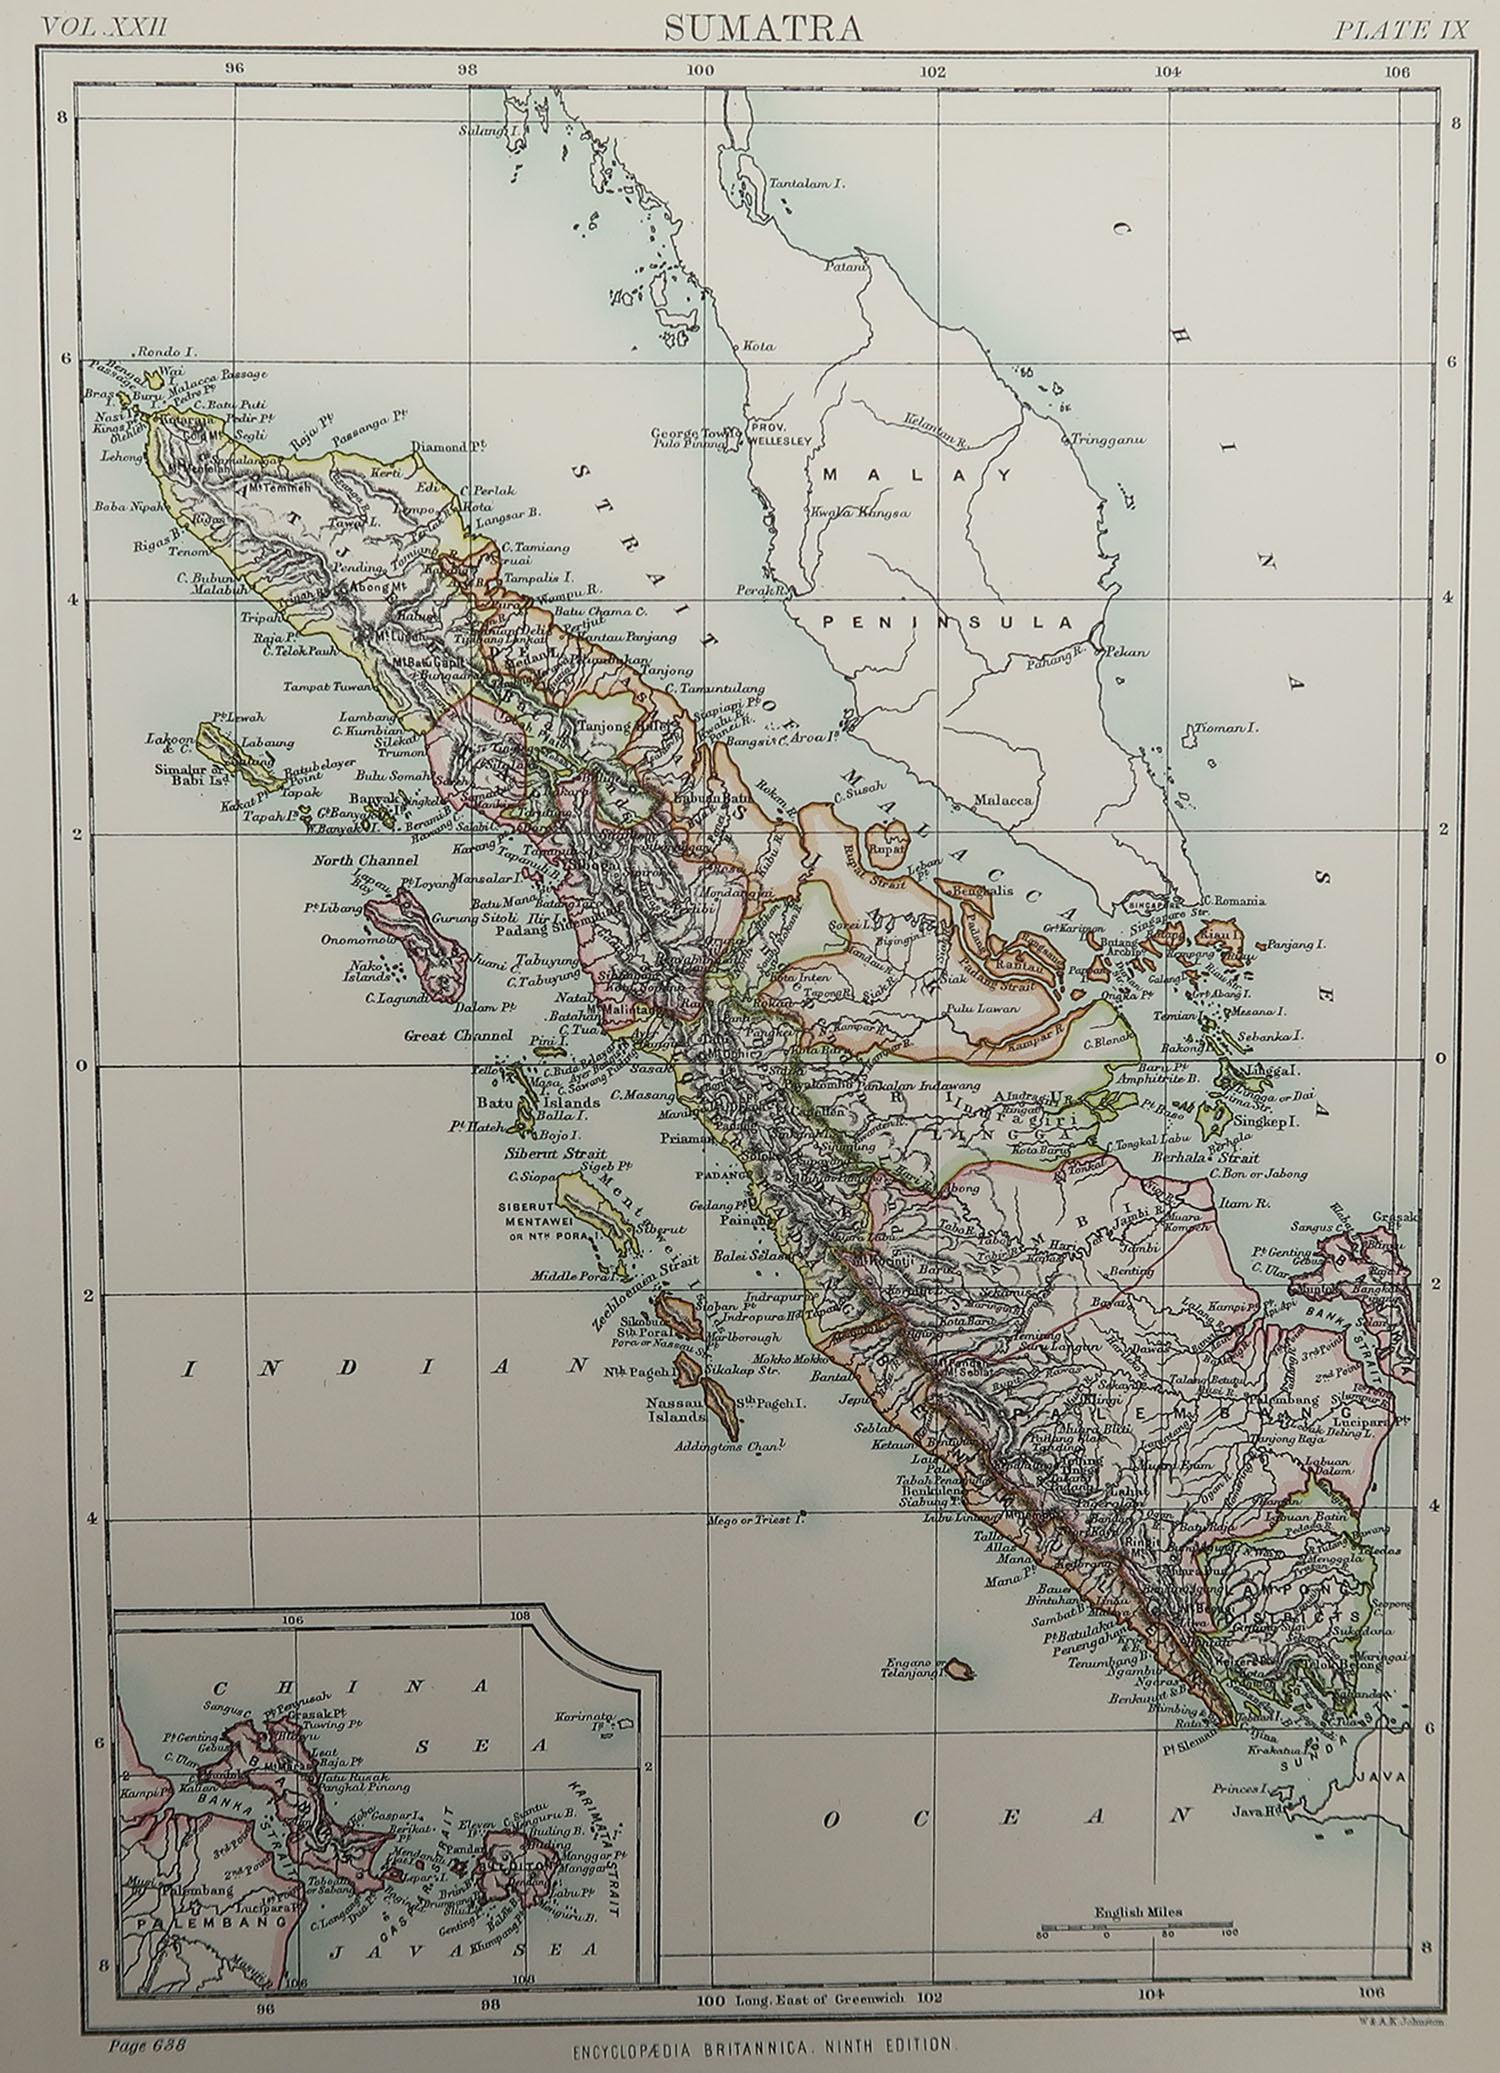 Great map of Sumatra

Drawn and Engraved by W. & A.K. Johnston

Published By A & C Black, Edinburgh.

Original colour

Unframed.








 